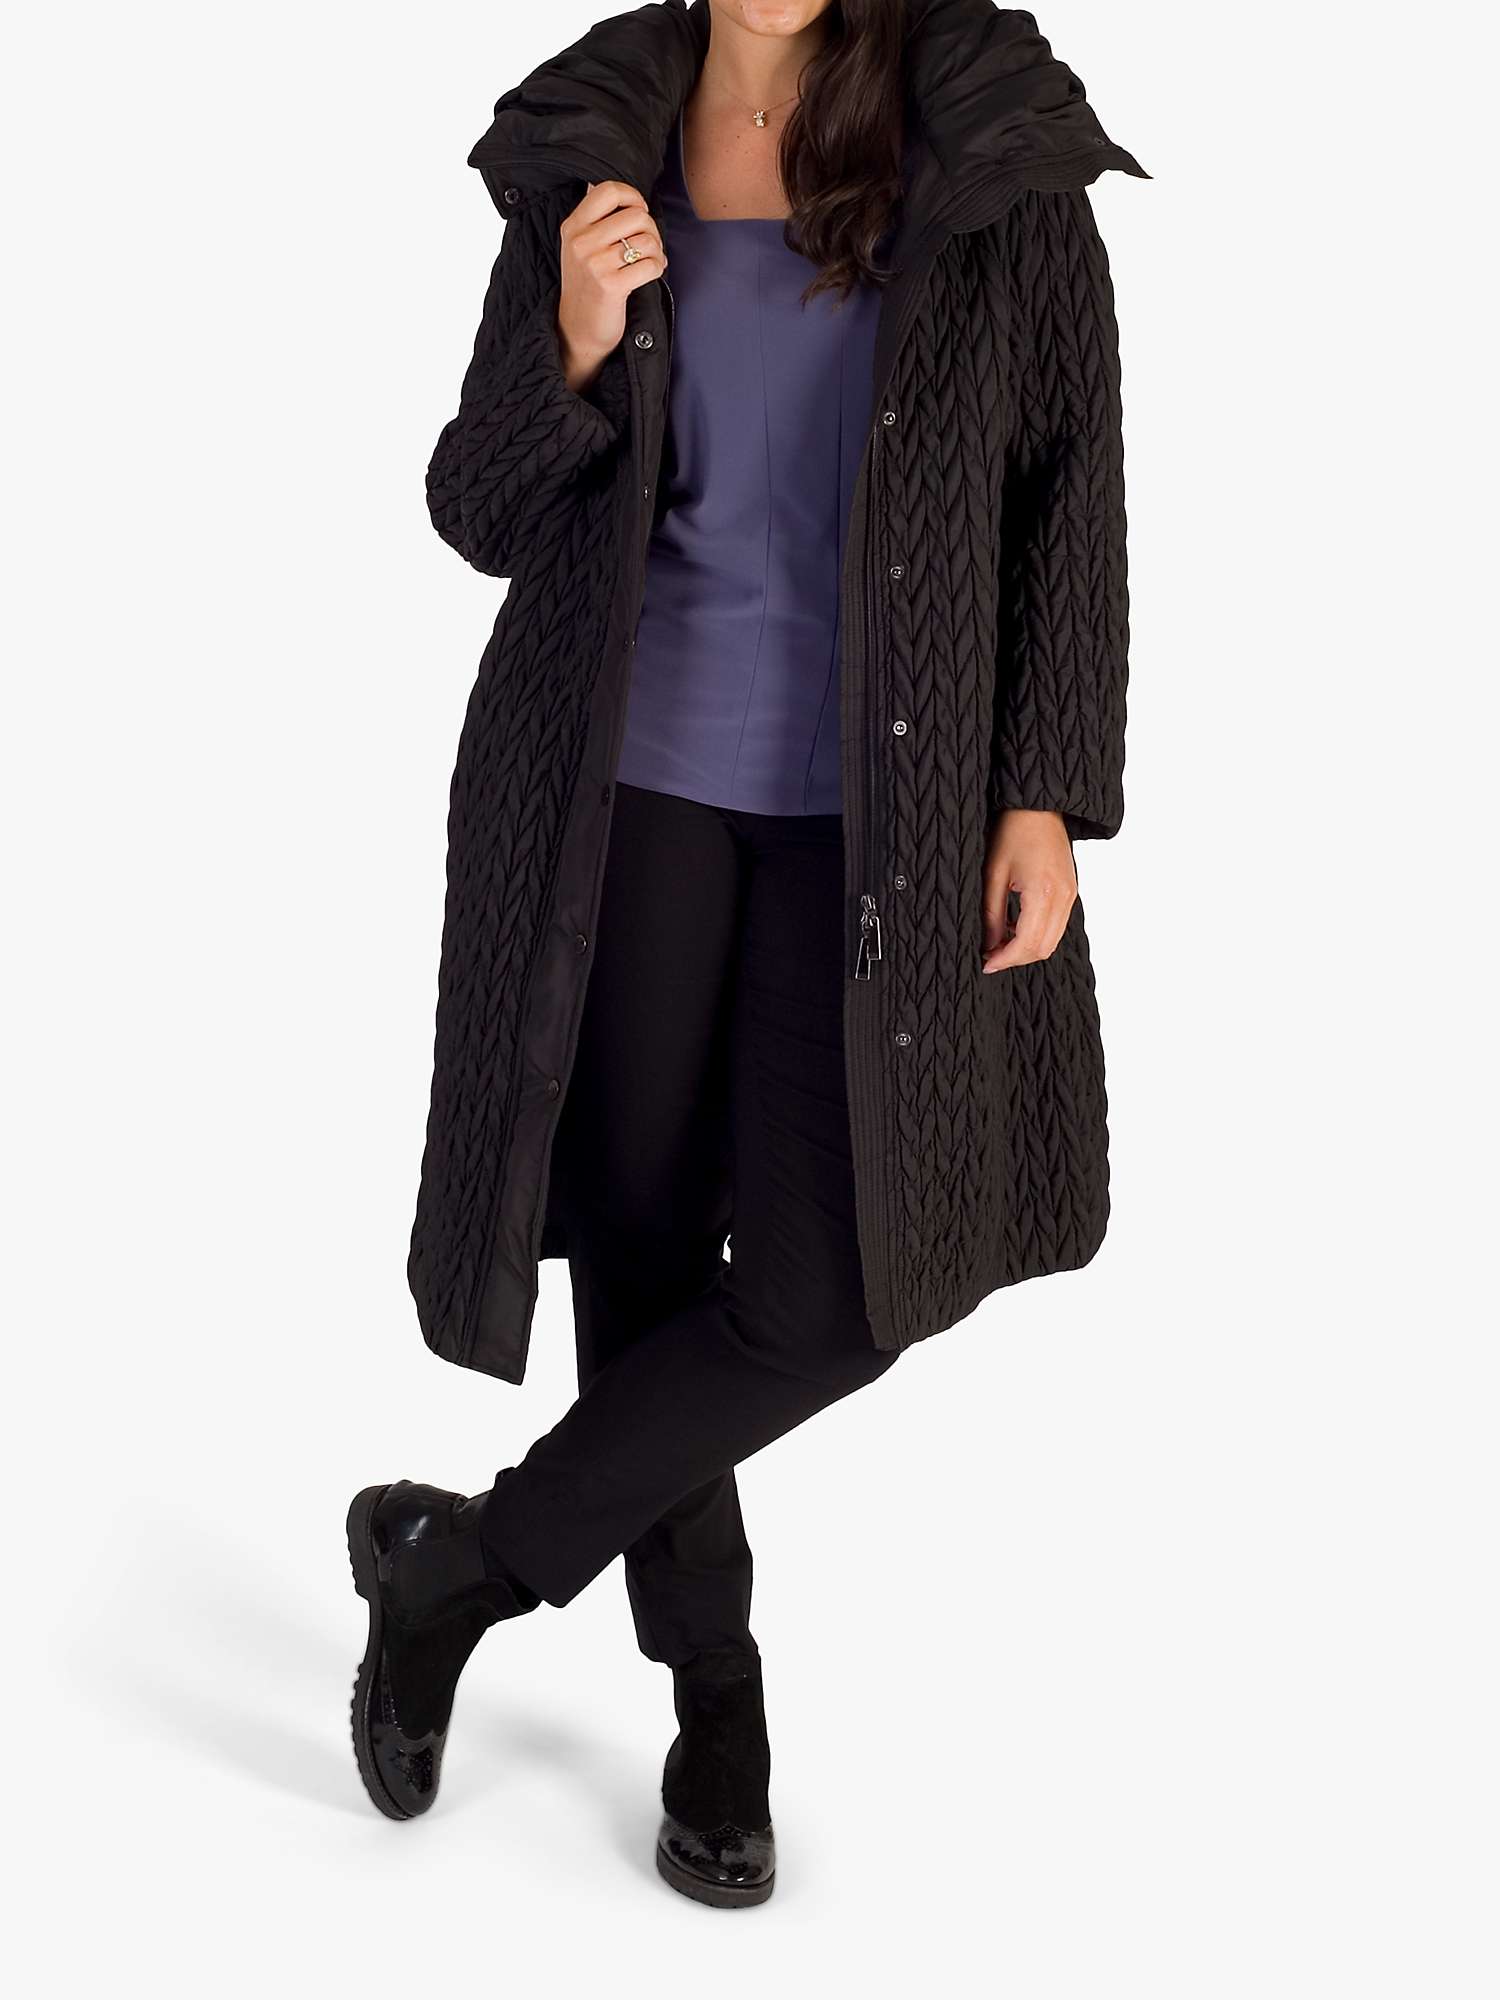 Buy chesca Square Neck Long Sleeve Top Online at johnlewis.com